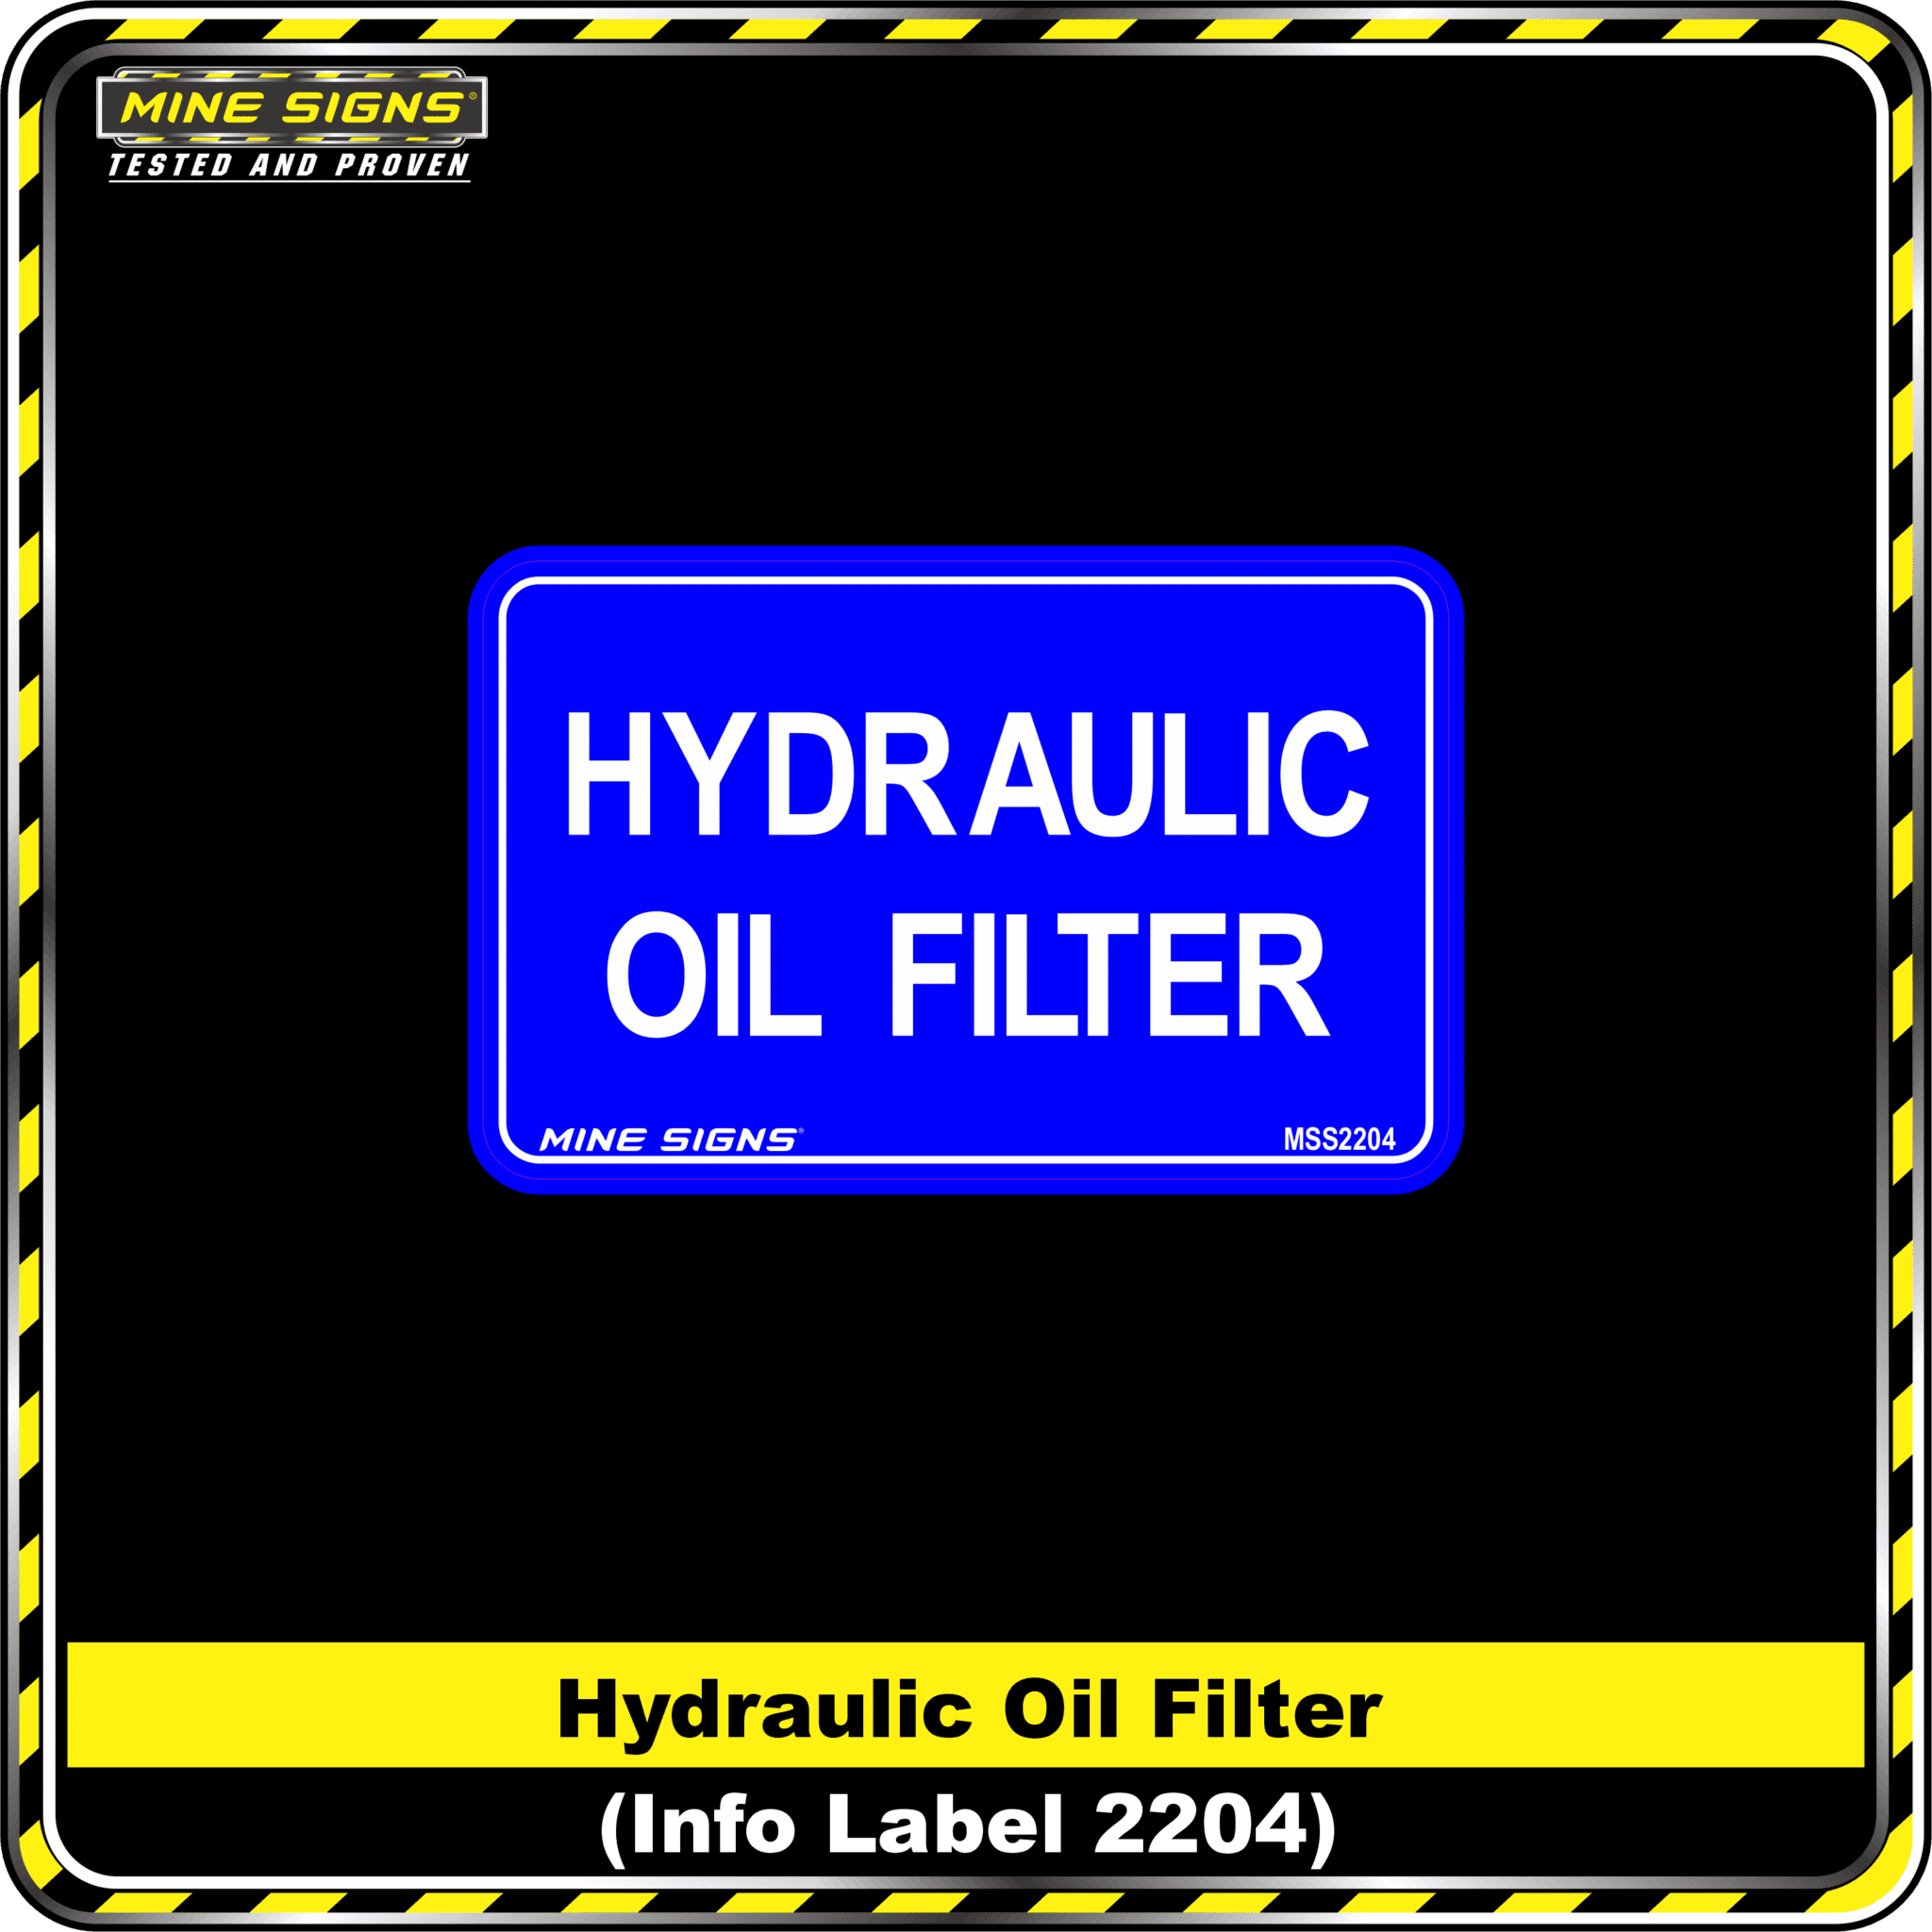 MS - Product Background - Safety Signs - Hydraulic Oil Filter 2204